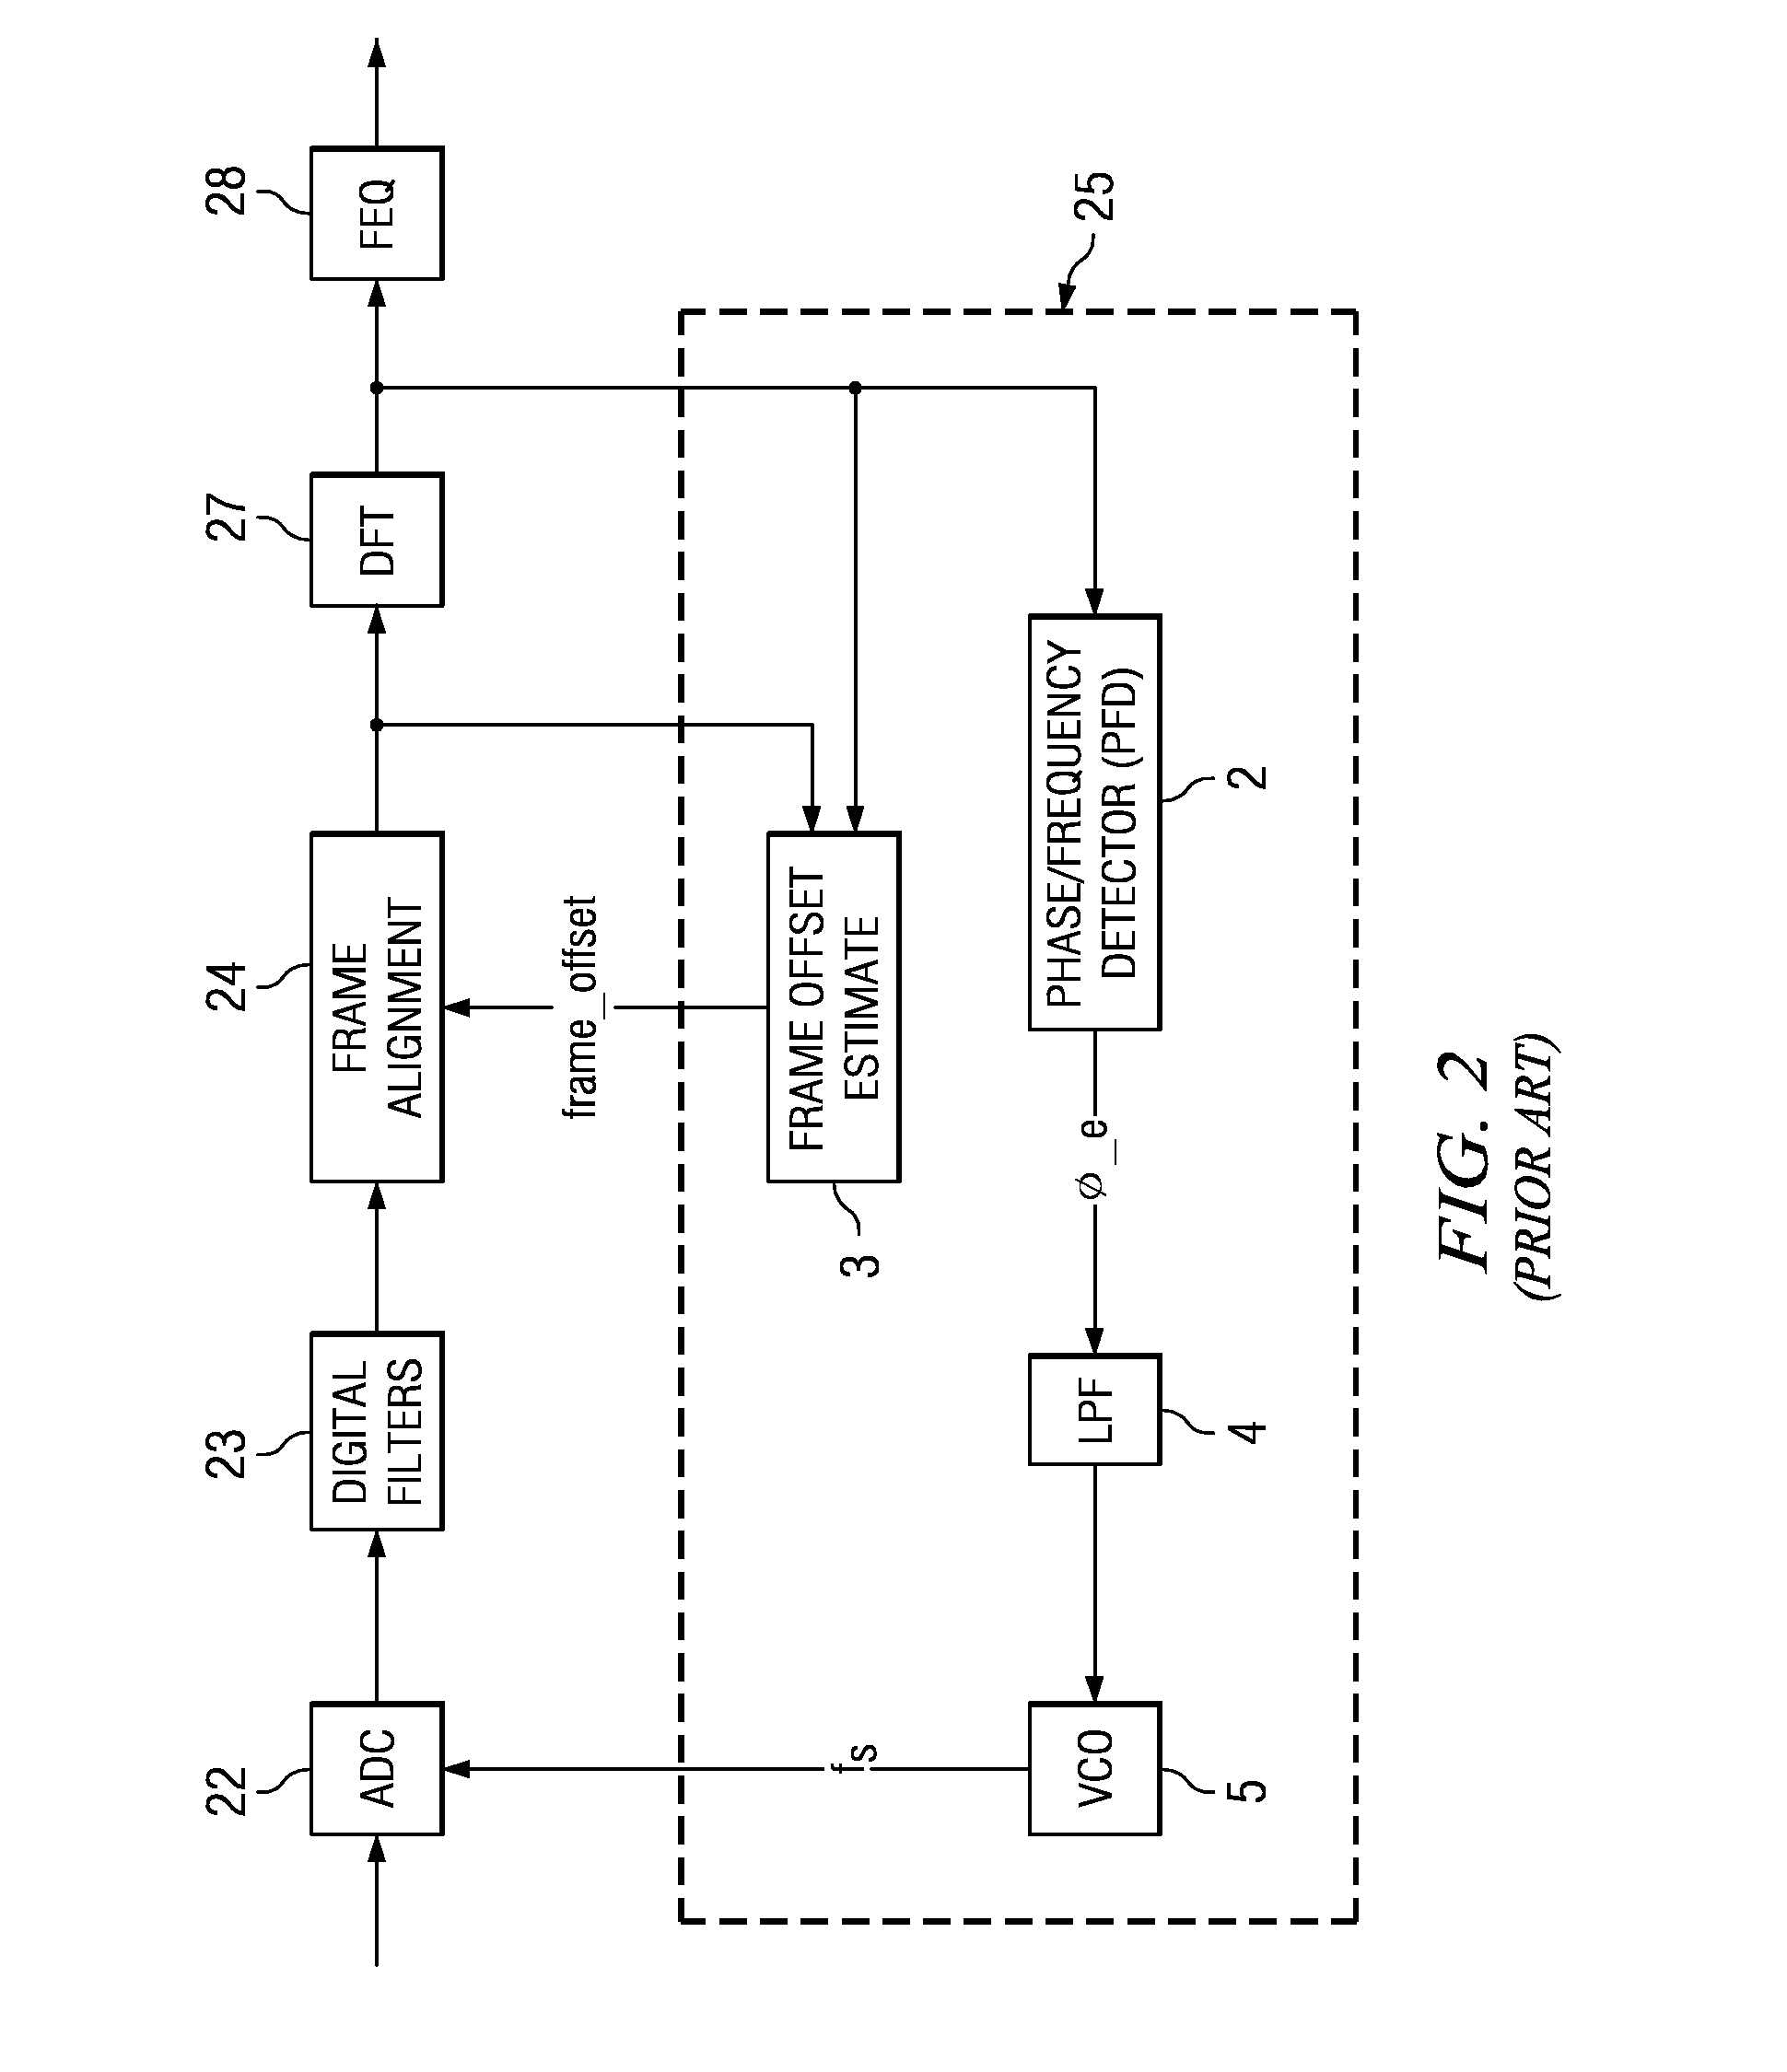 Combined frame alignment and timing recovery in digital subscriber line (DSL) communications systems